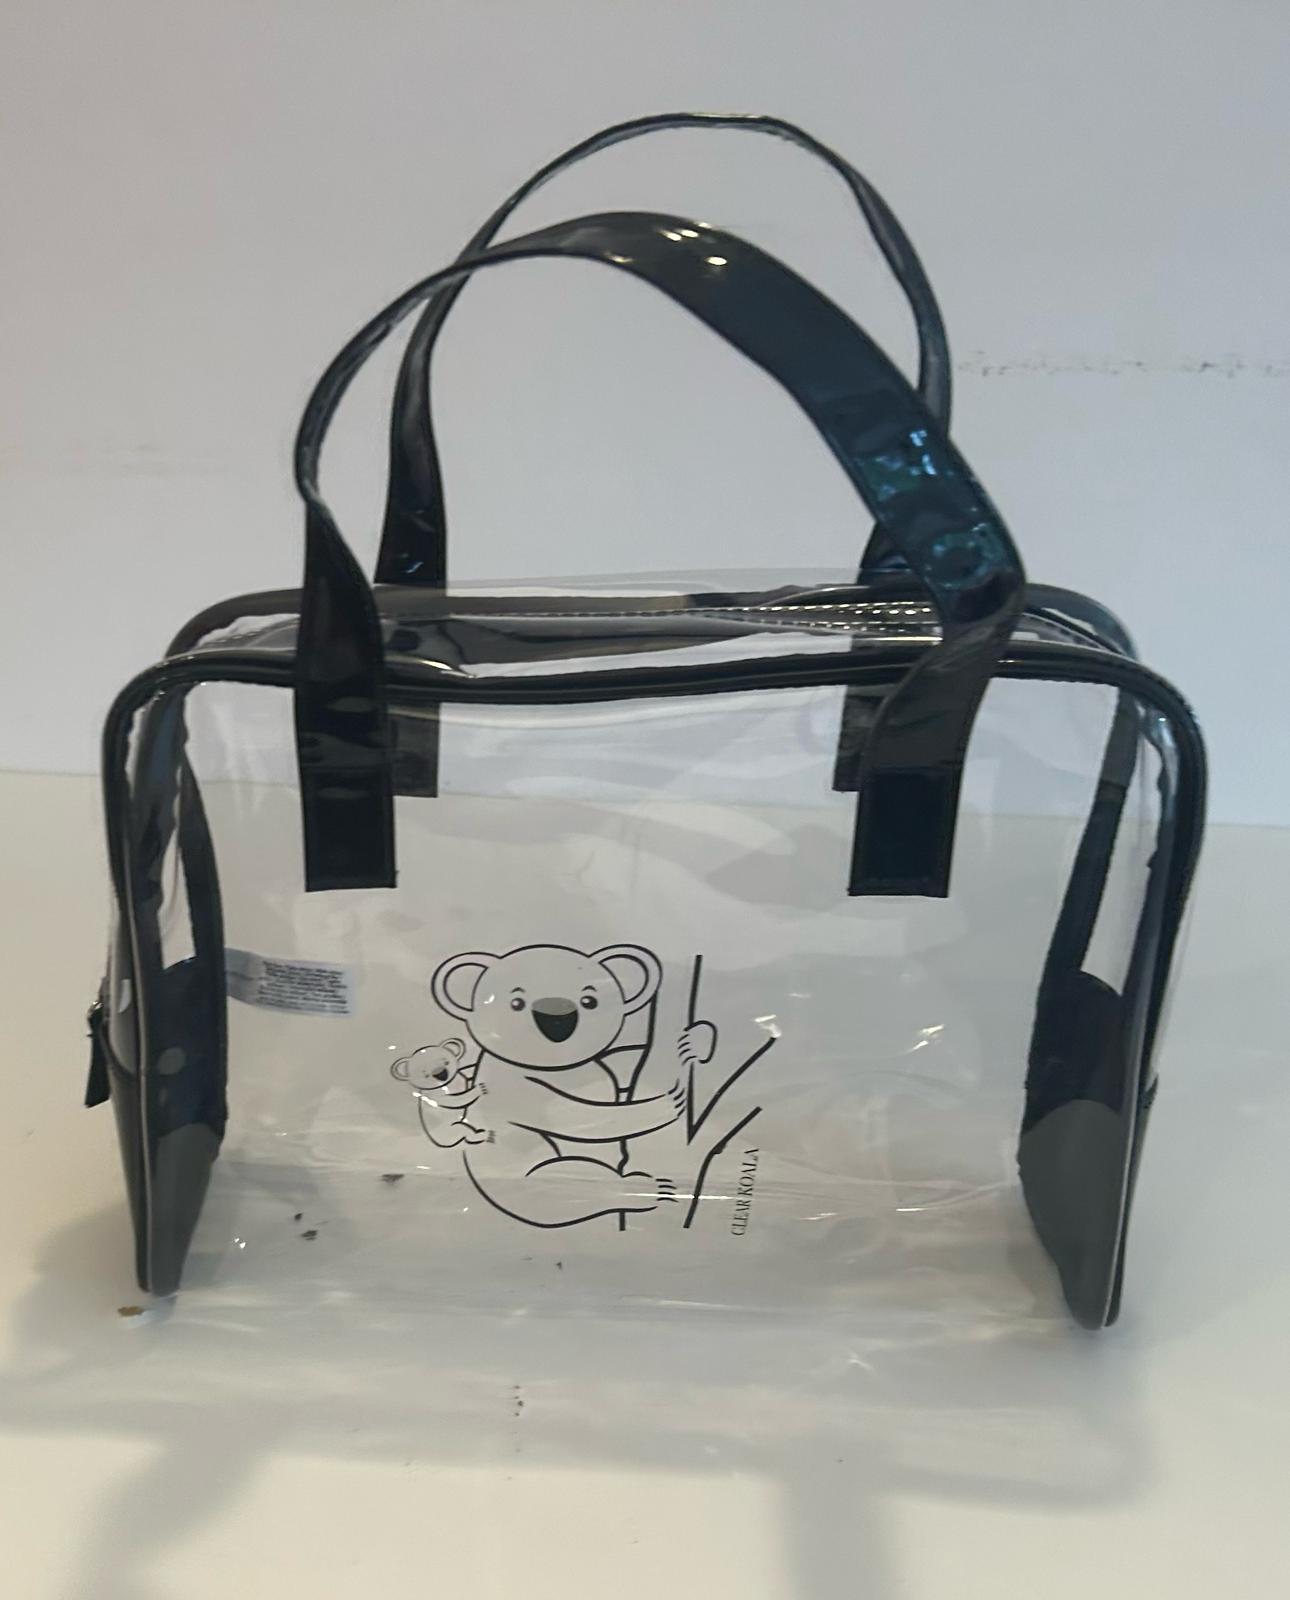 Transparent bag for students for elementary and middle school 